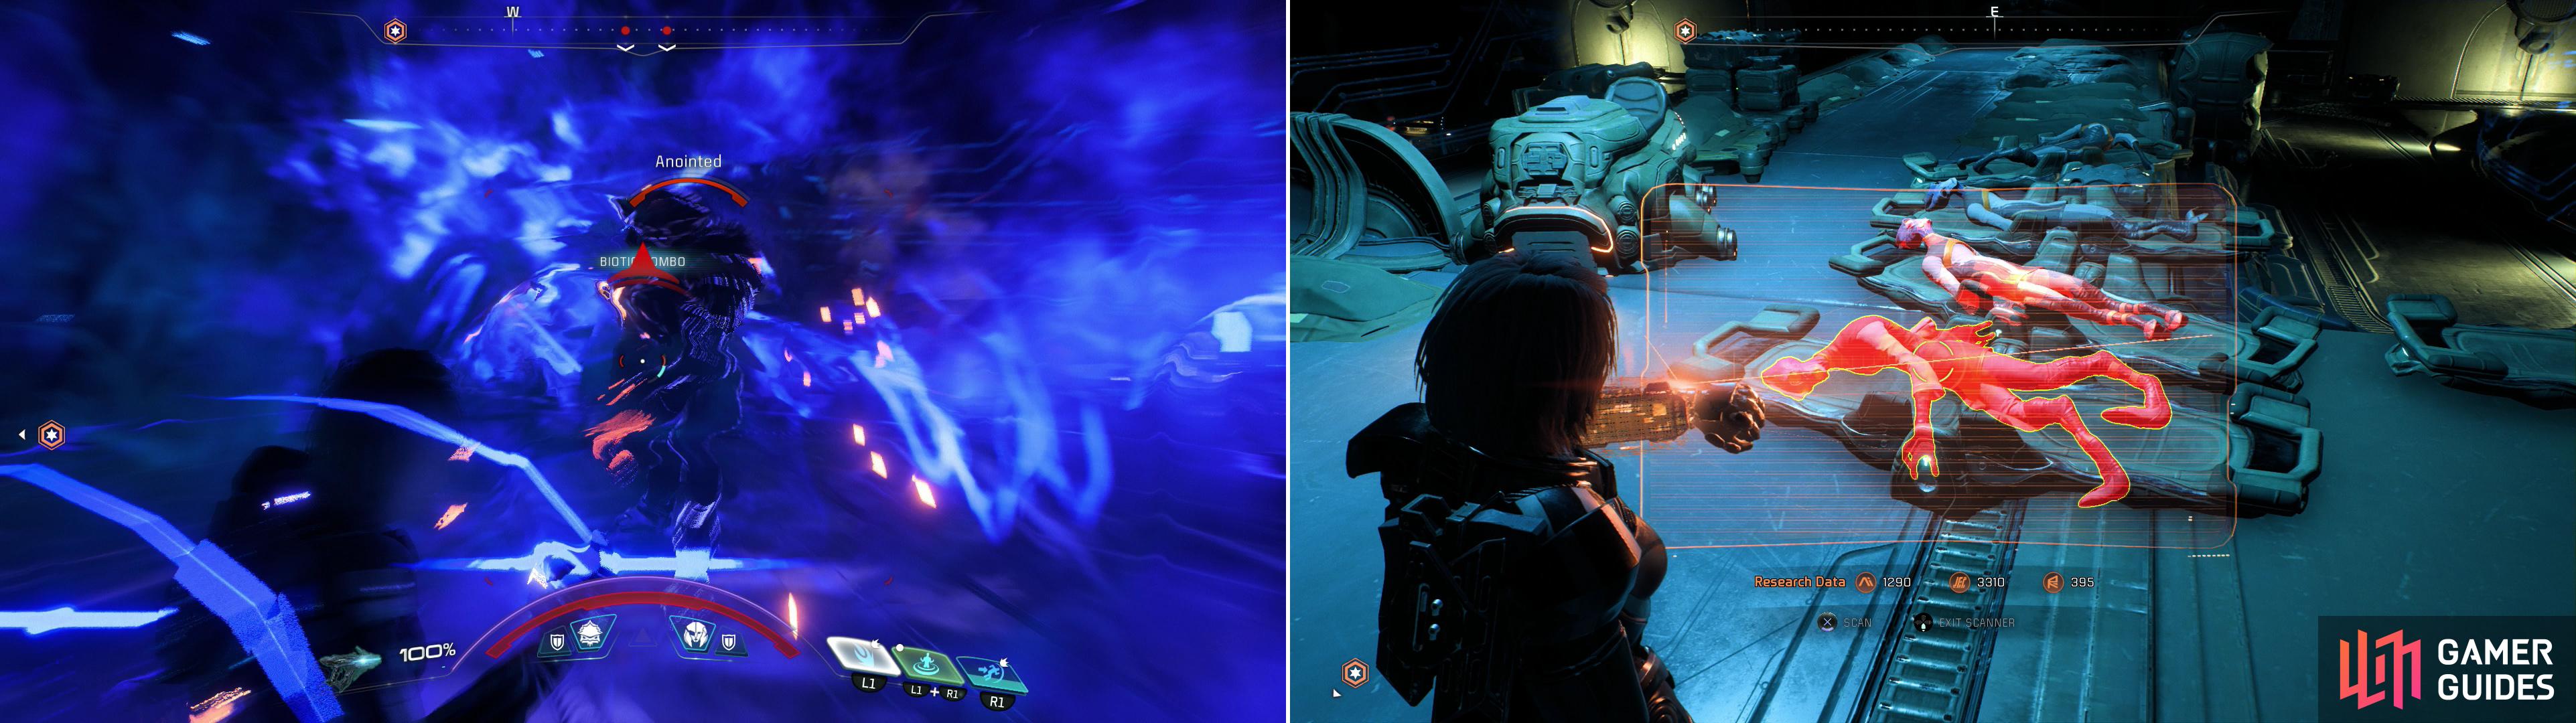 Slaughter your way through some Kett laboratories (left) where youll find gruesome evidence of how poorly the Kett have treated the Salarian colonists (right).